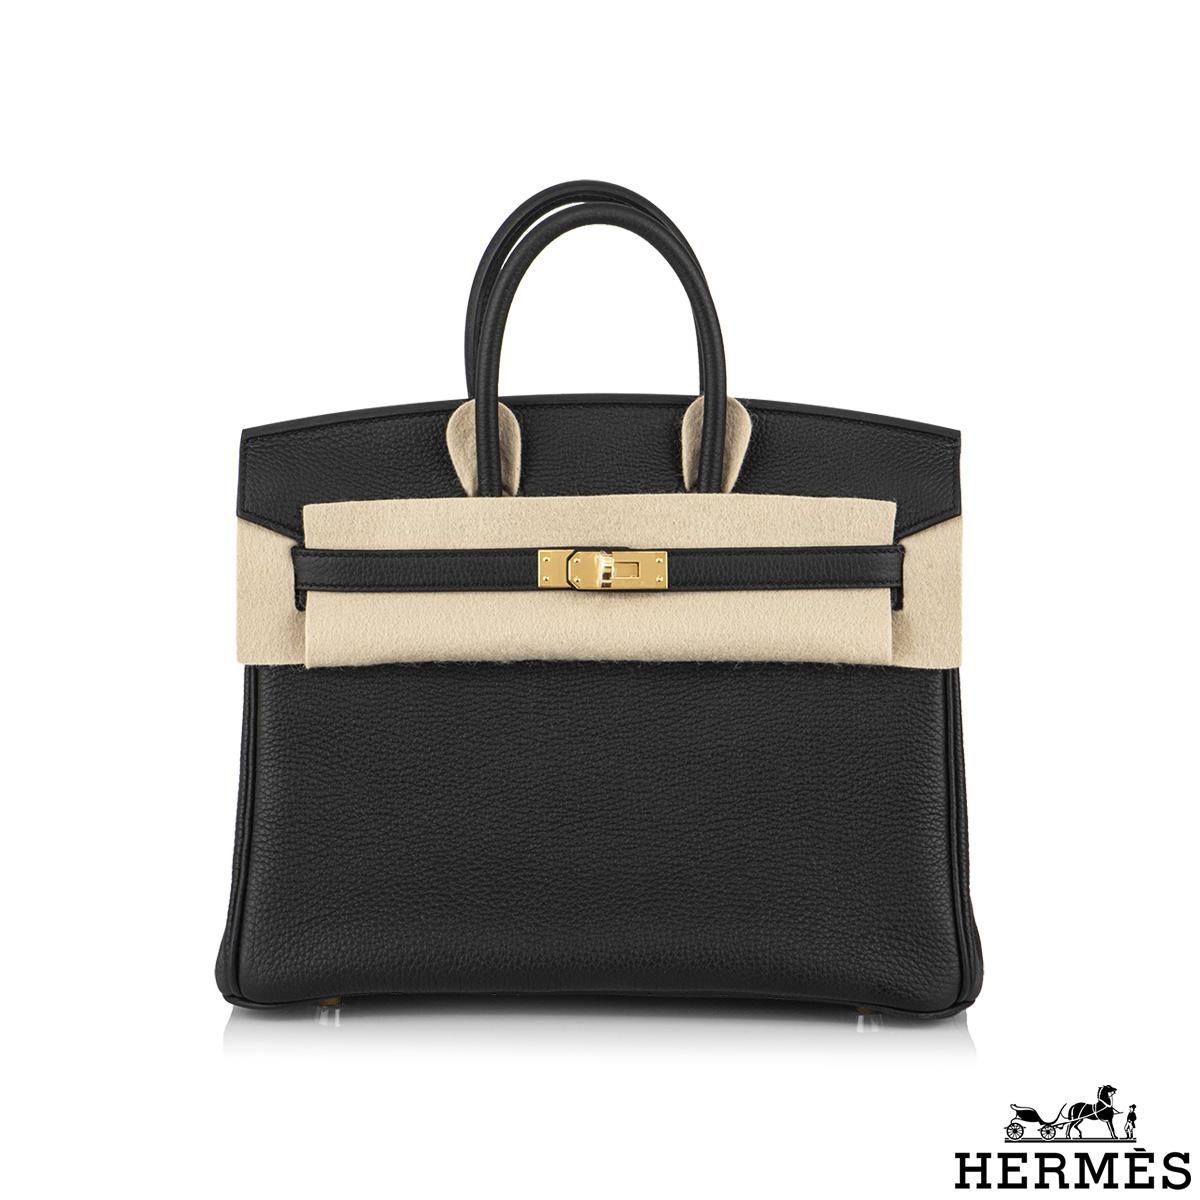 An exquisite Hermès 25cm Birkin bag. The exterior of this birkin is in black togo leather with tonal stitching. It features gold tone hardware with two straps and front toggle closure. The interior is lined with black chevre and has a zip pocket